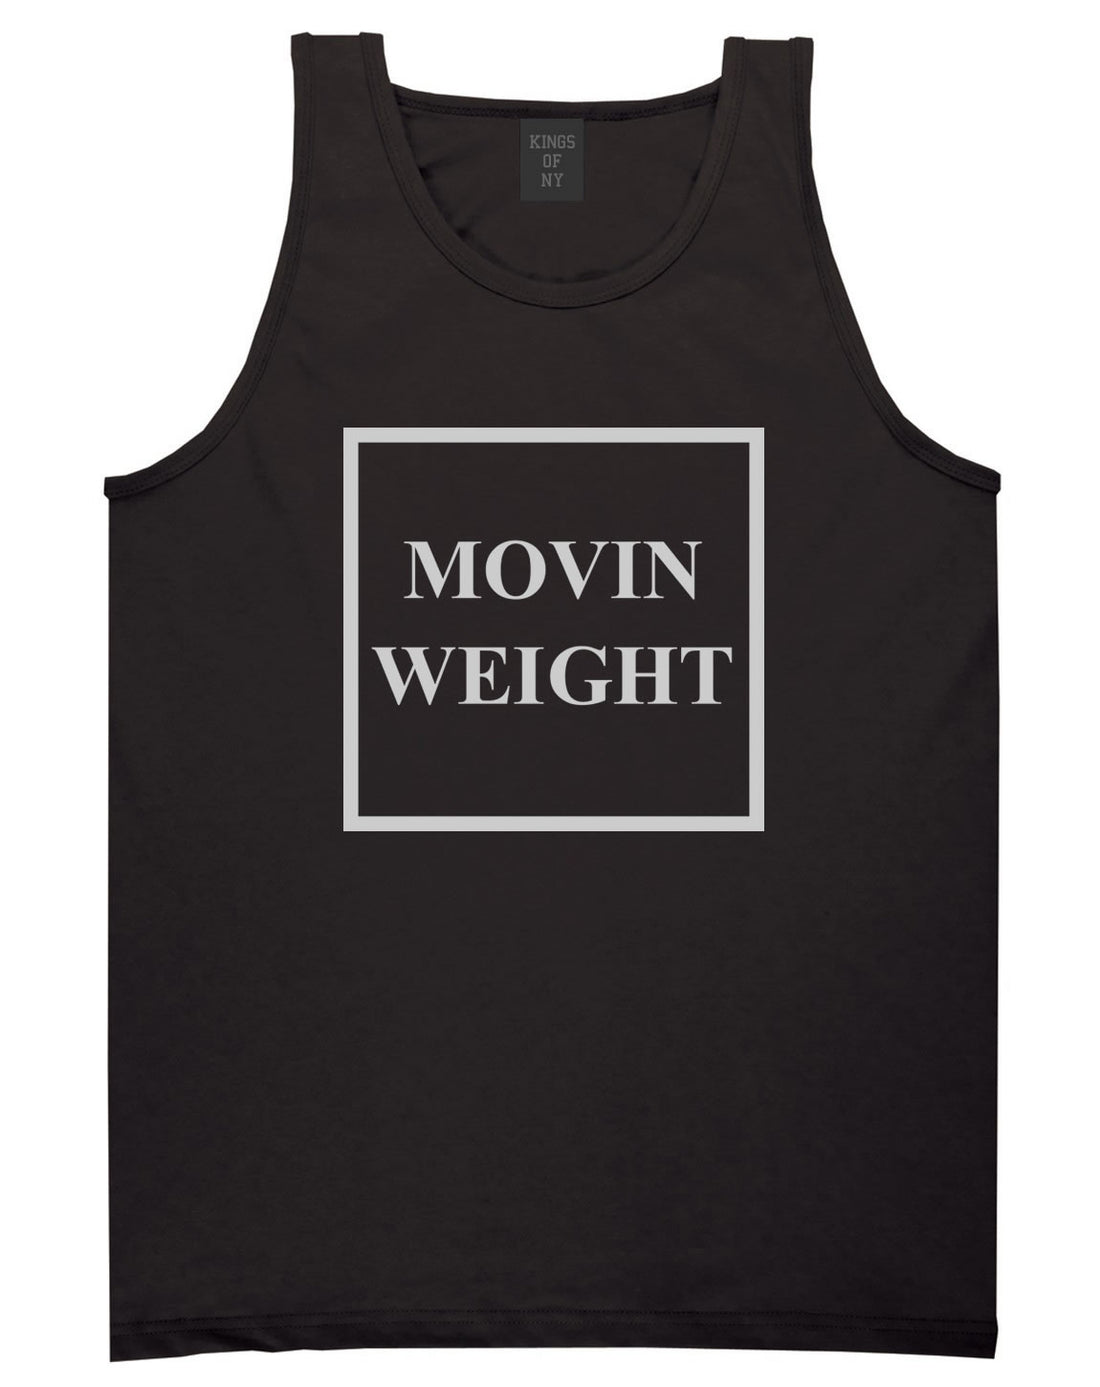 Movin Weight Hustler Tank Top in Black by Kings Of NY